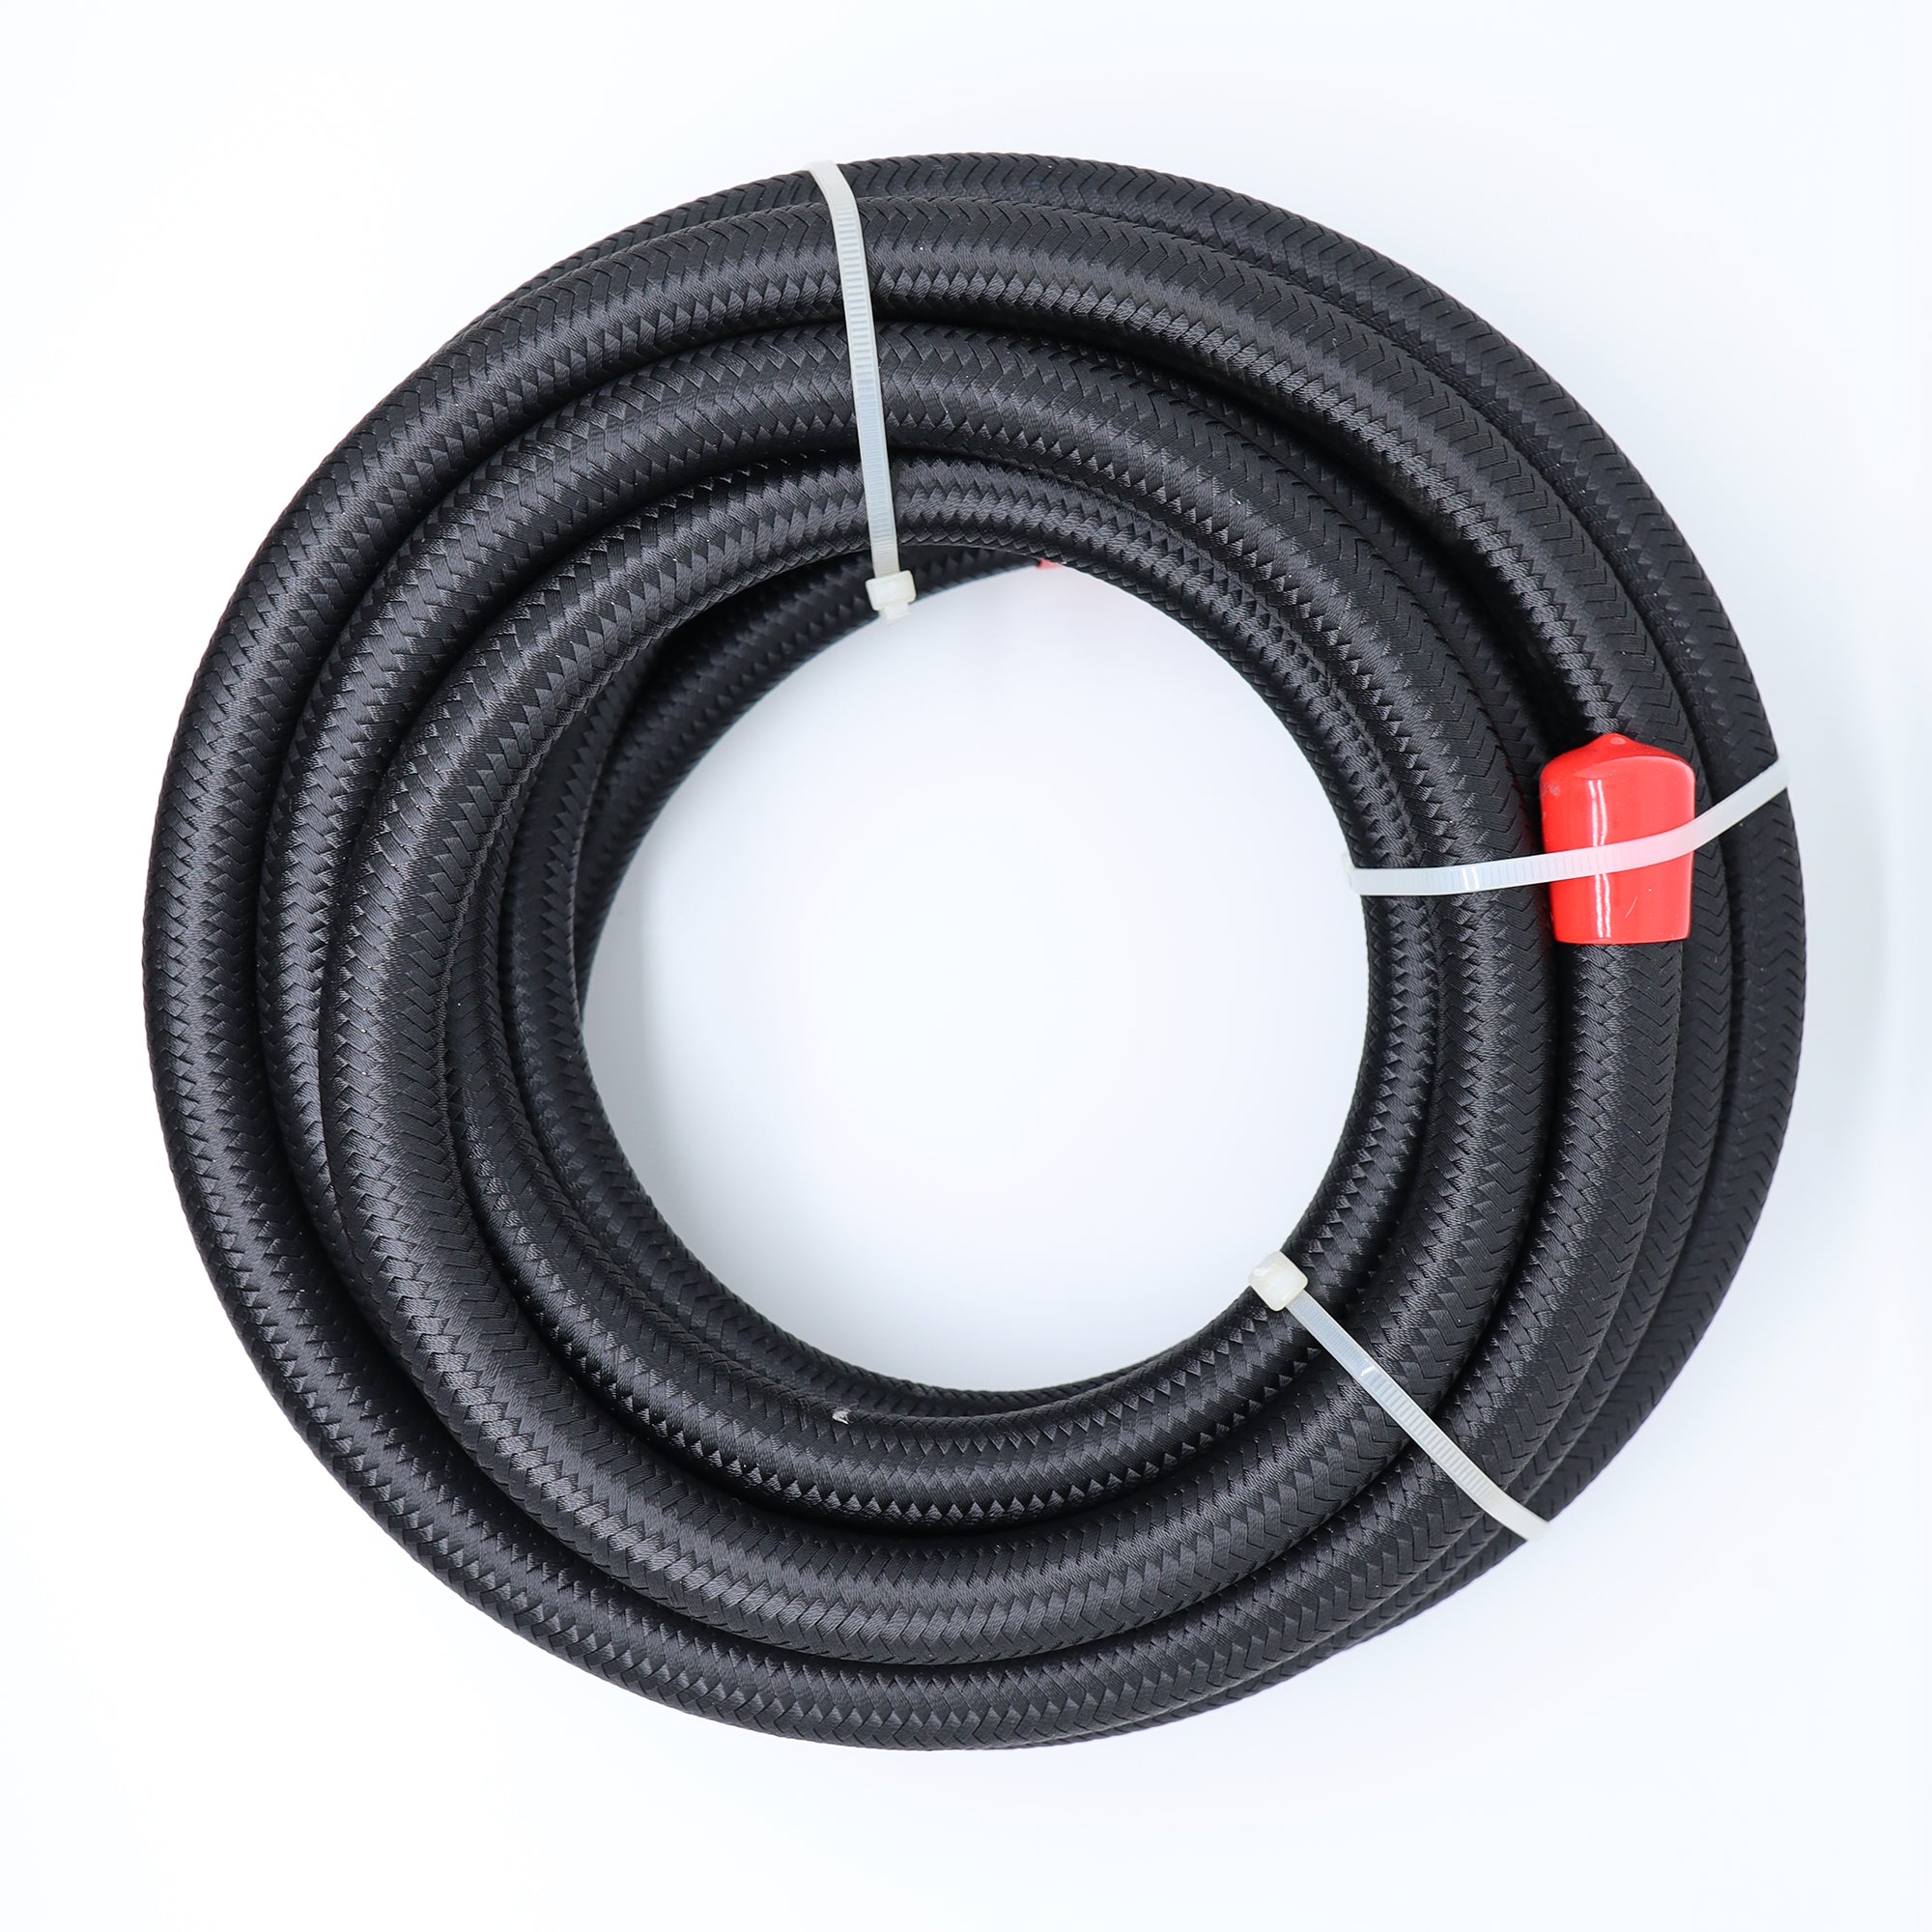 Nylon Stainless Steel Braided PTFE Fuel Hose - Blue/Red/Black 3/8 10mm ID - PTFE 20ft Hose / Black